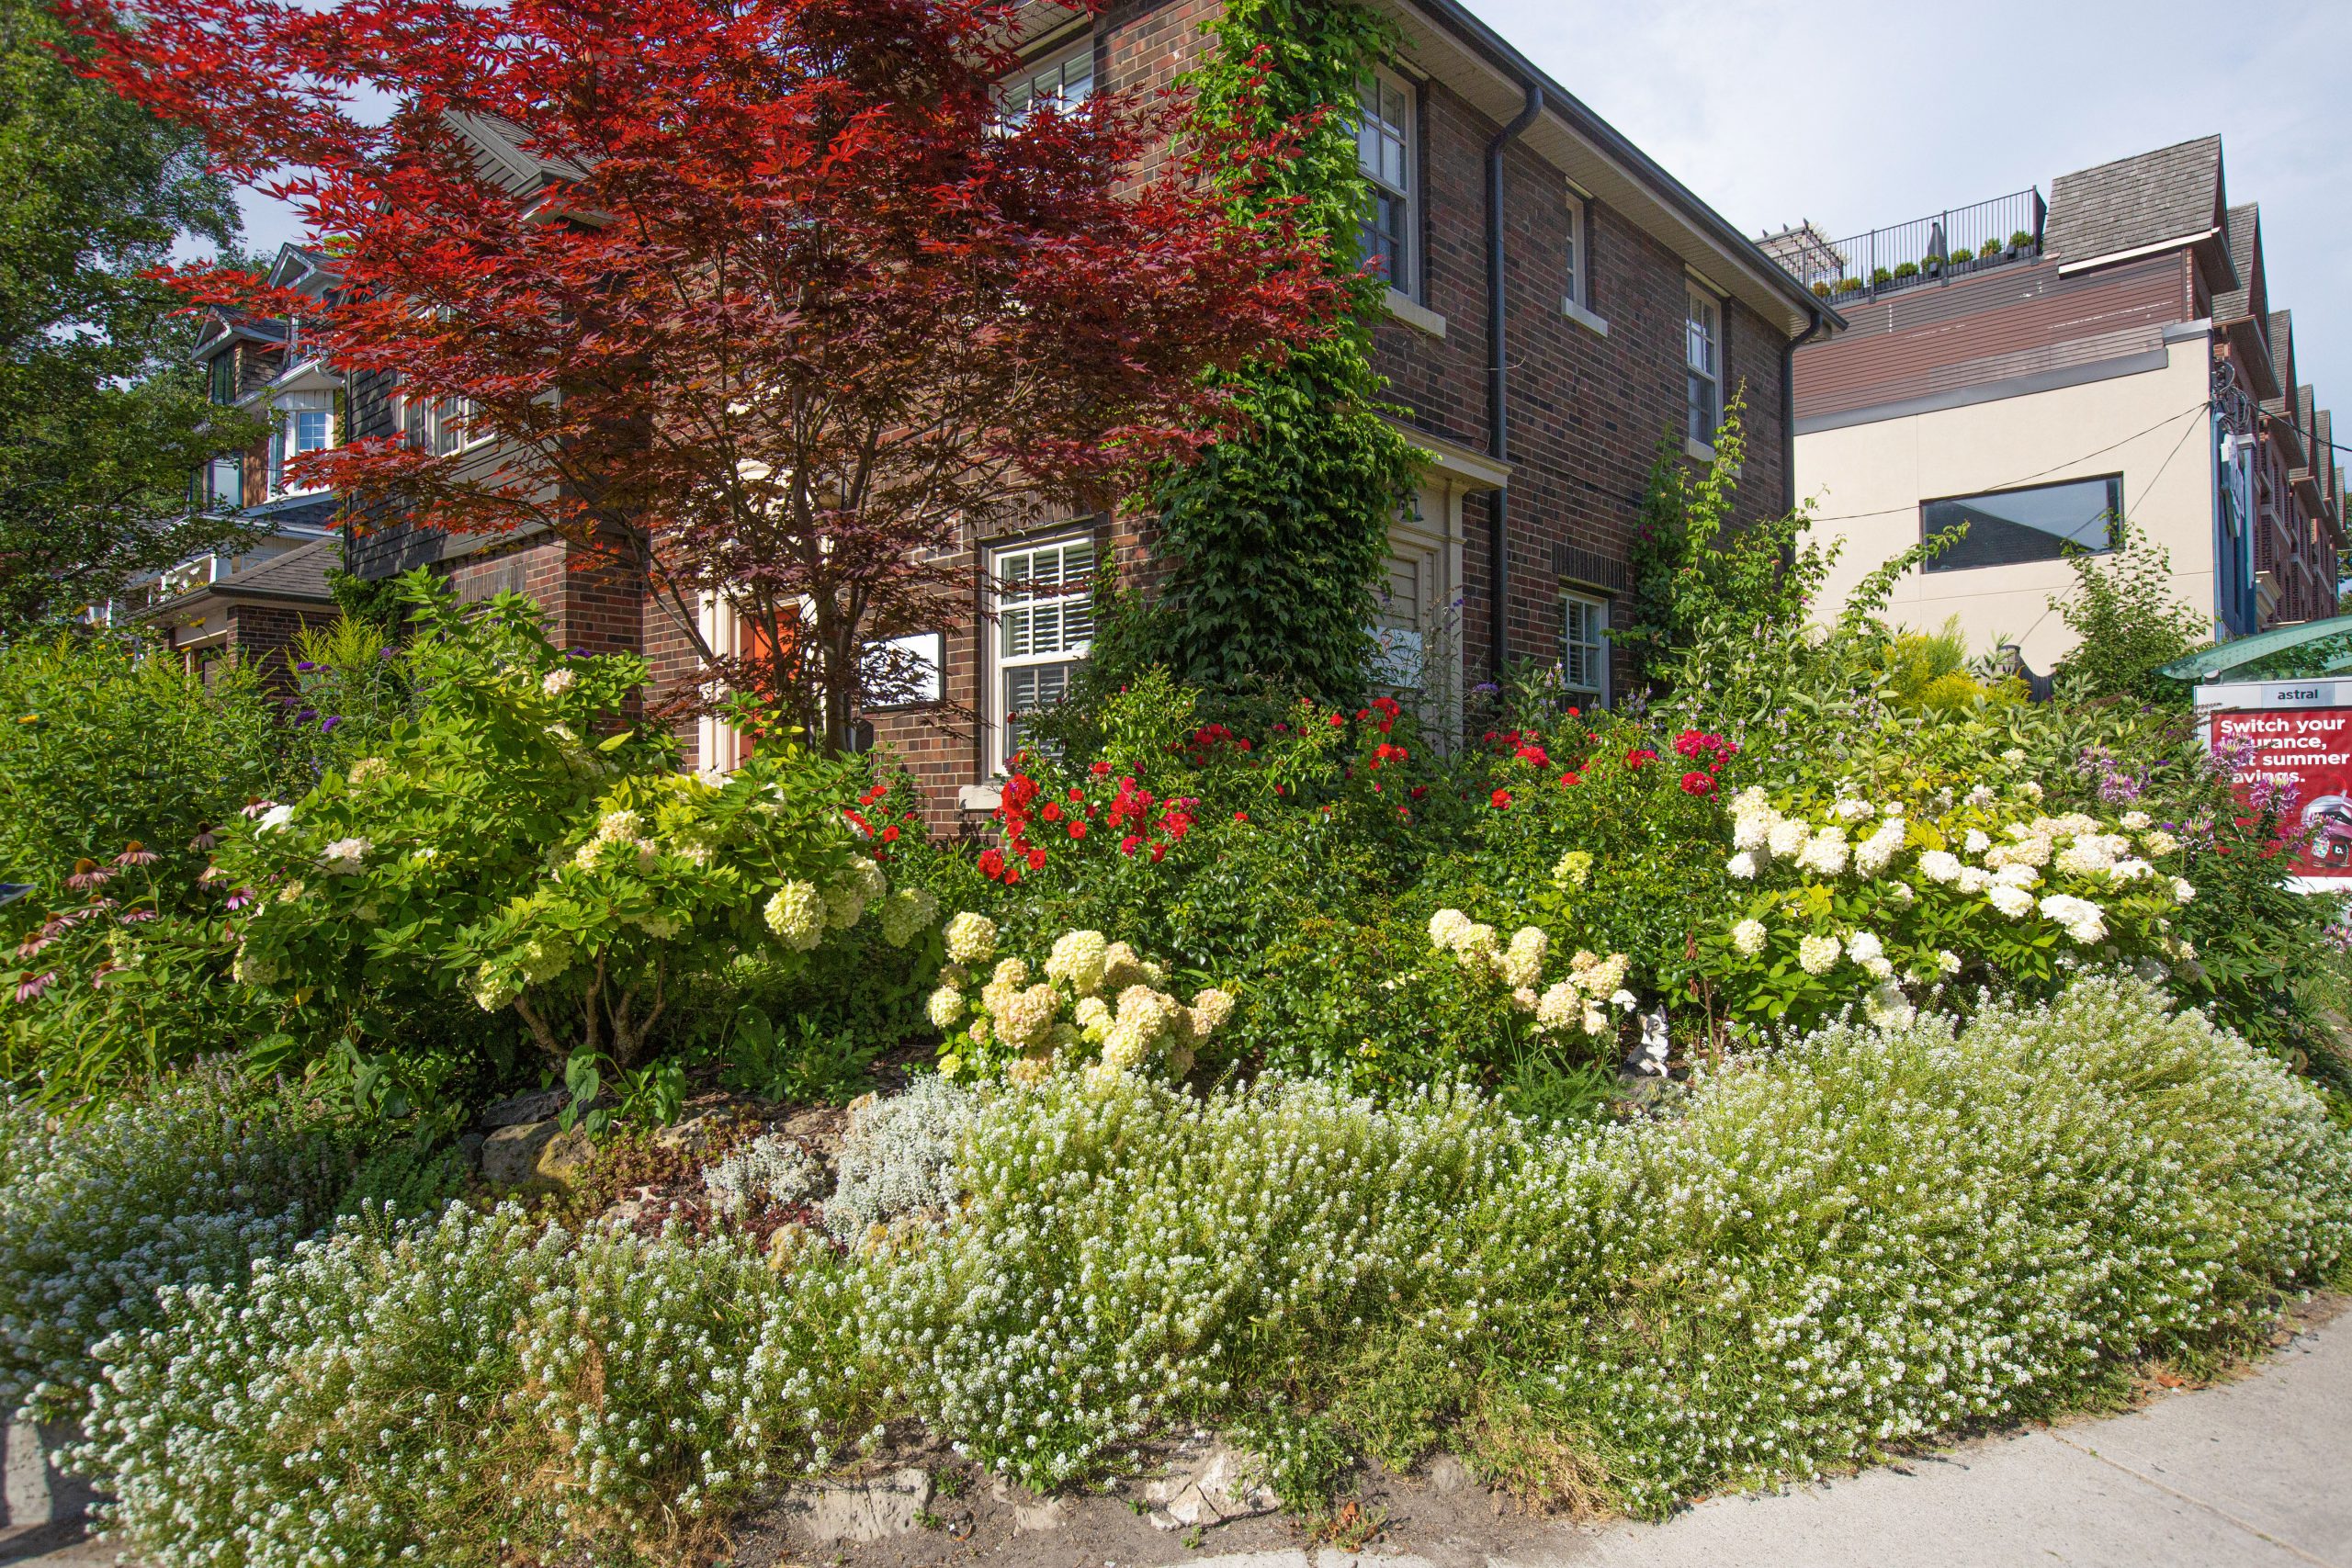 A luscious flowered garden in front of a red brick building filled with bright green, white and red flowers.